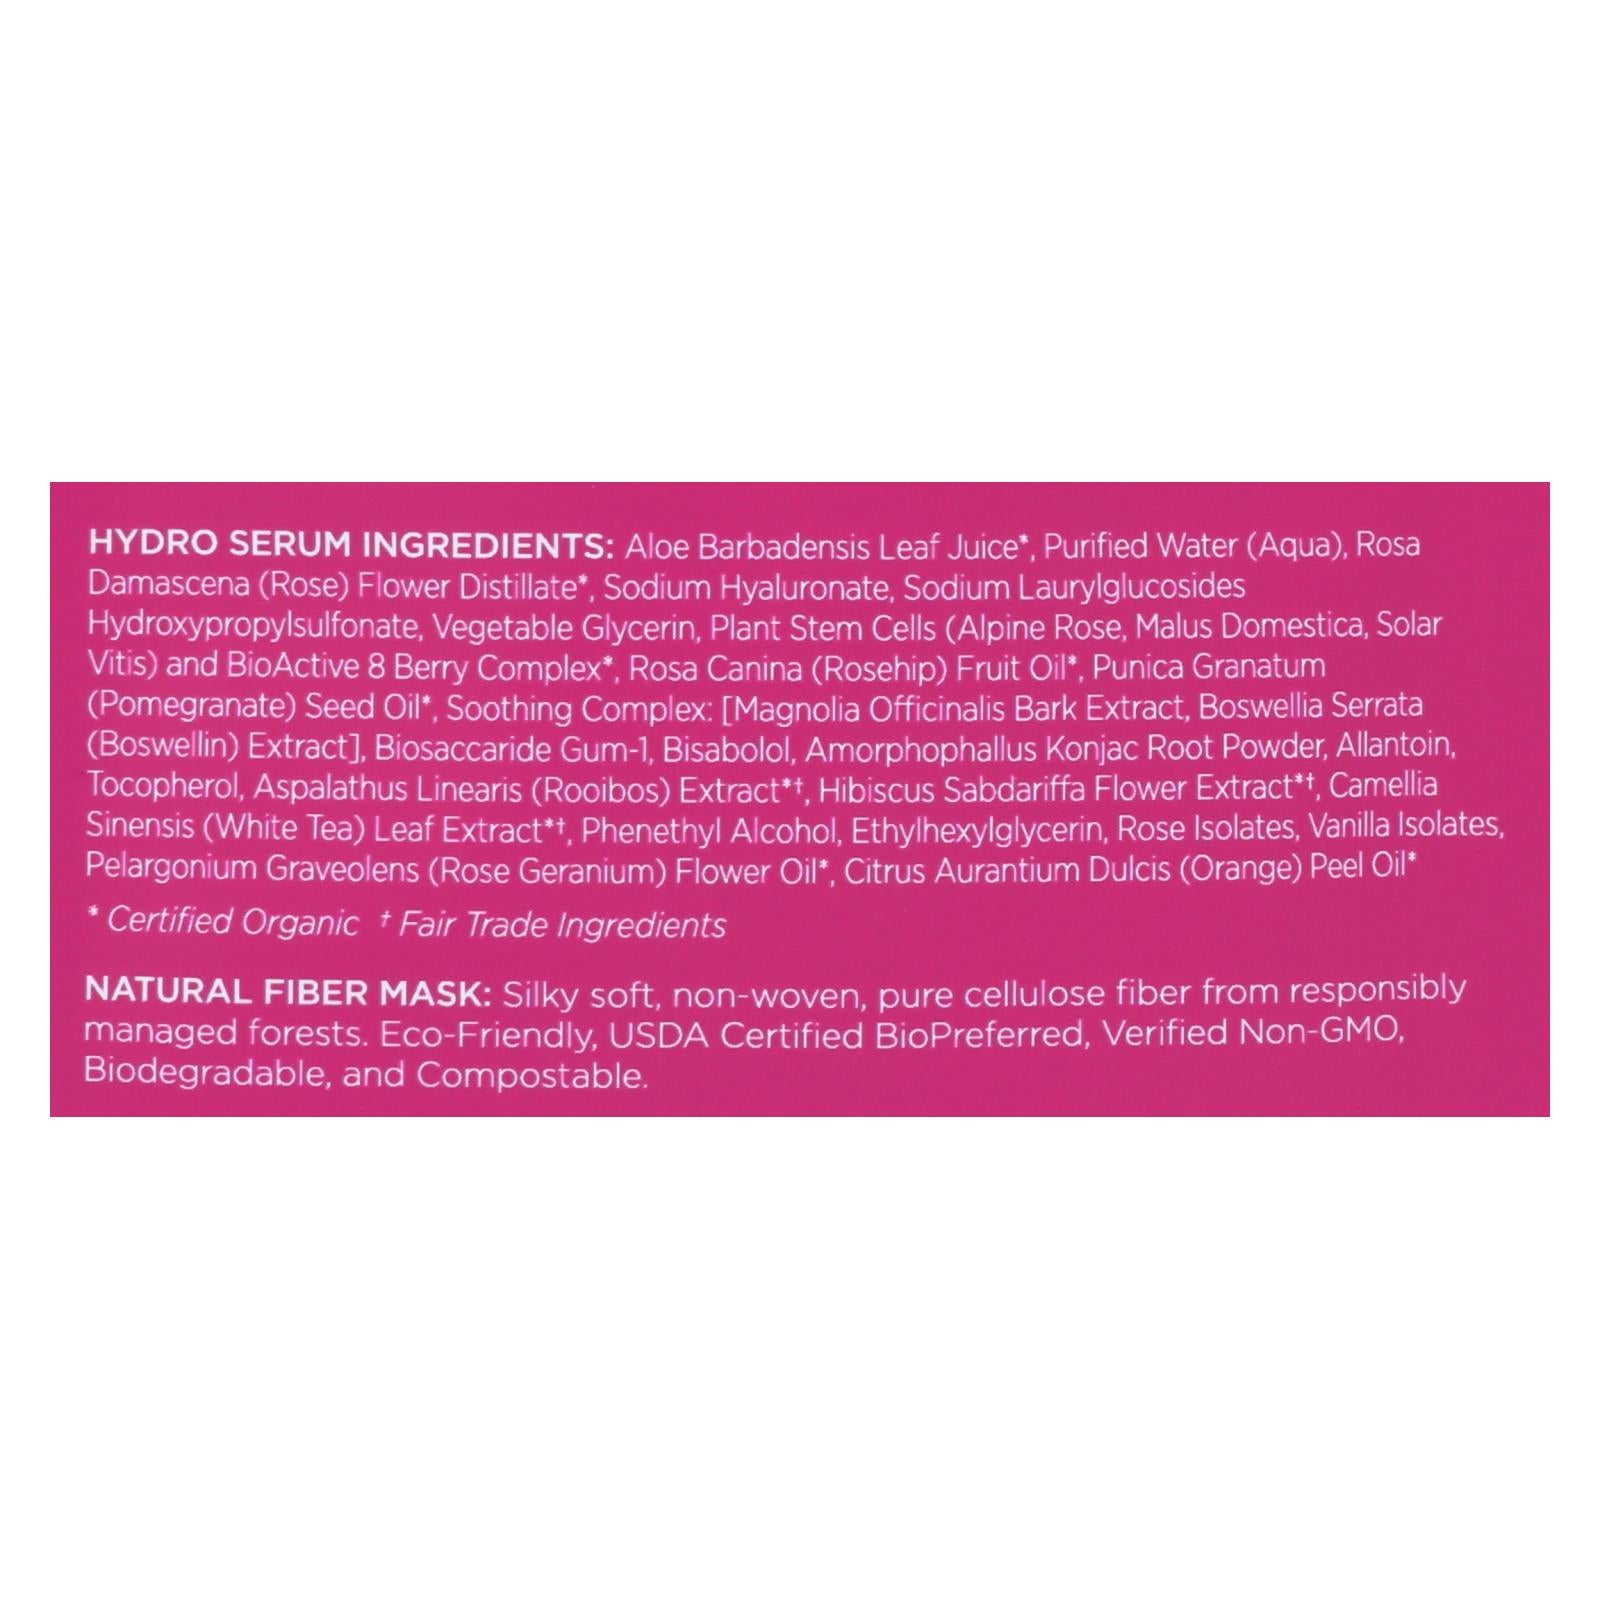 Andalou Naturals, andalou Naturals Instant Hydration Facial Mask - 1000 Roses Soothing - Case of 6 - 0.6 fl oz (Pack of 6)